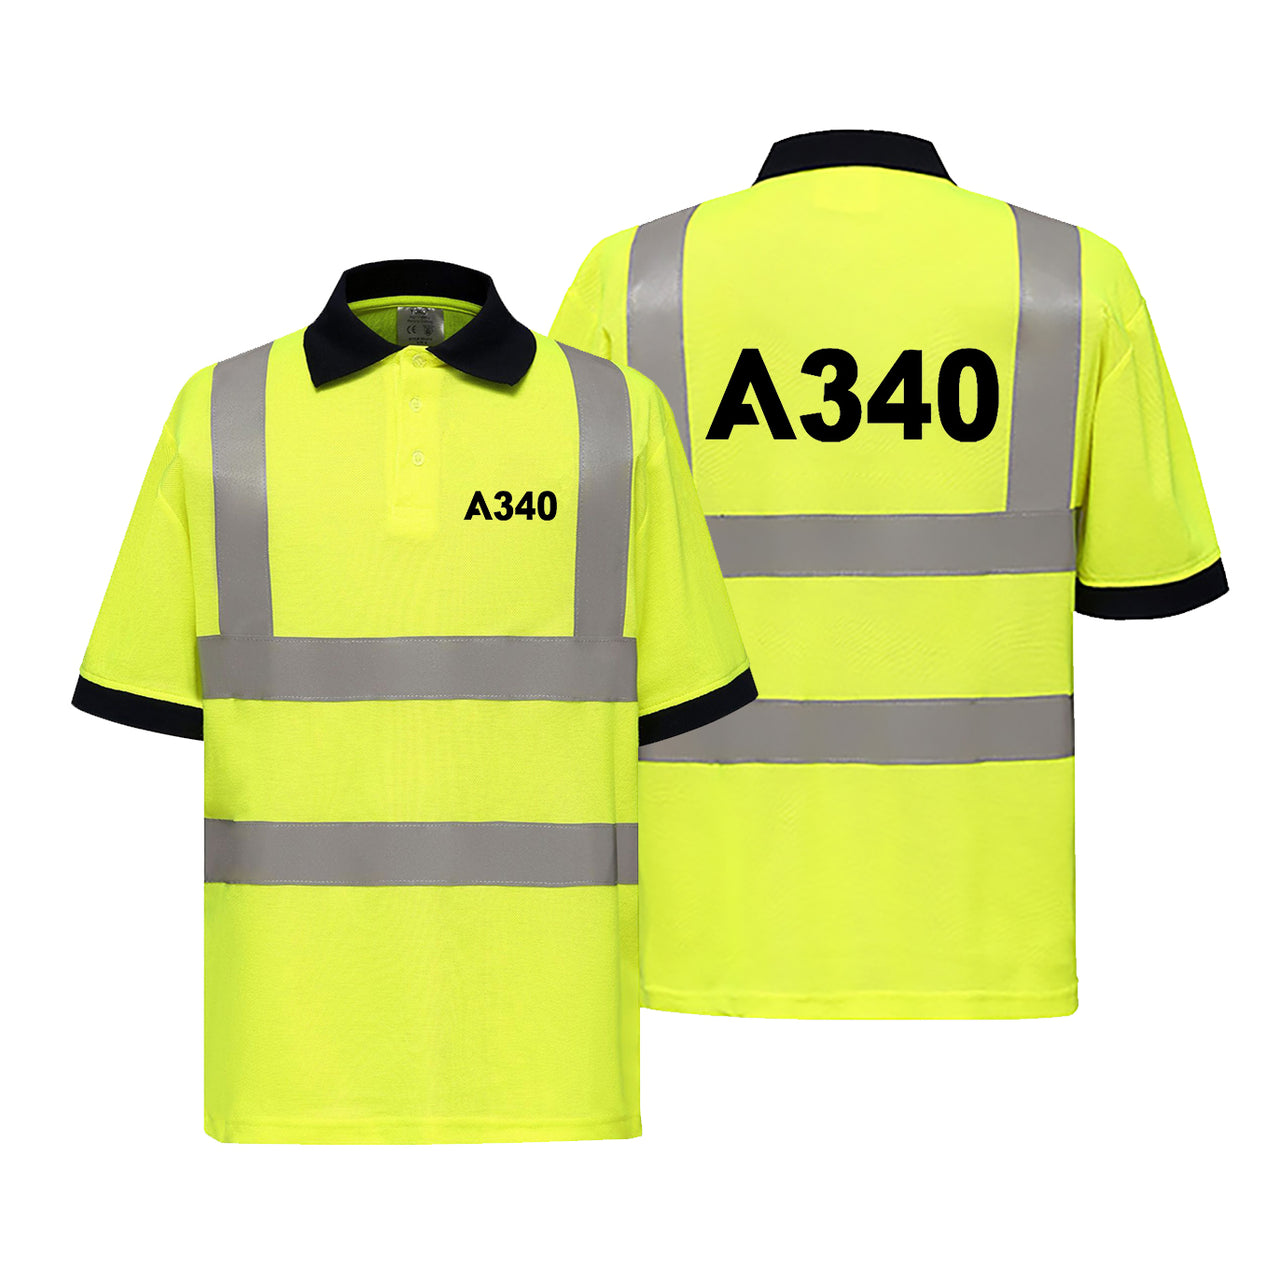 A340 Flat Text Designed Reflective Polo T-Shirts